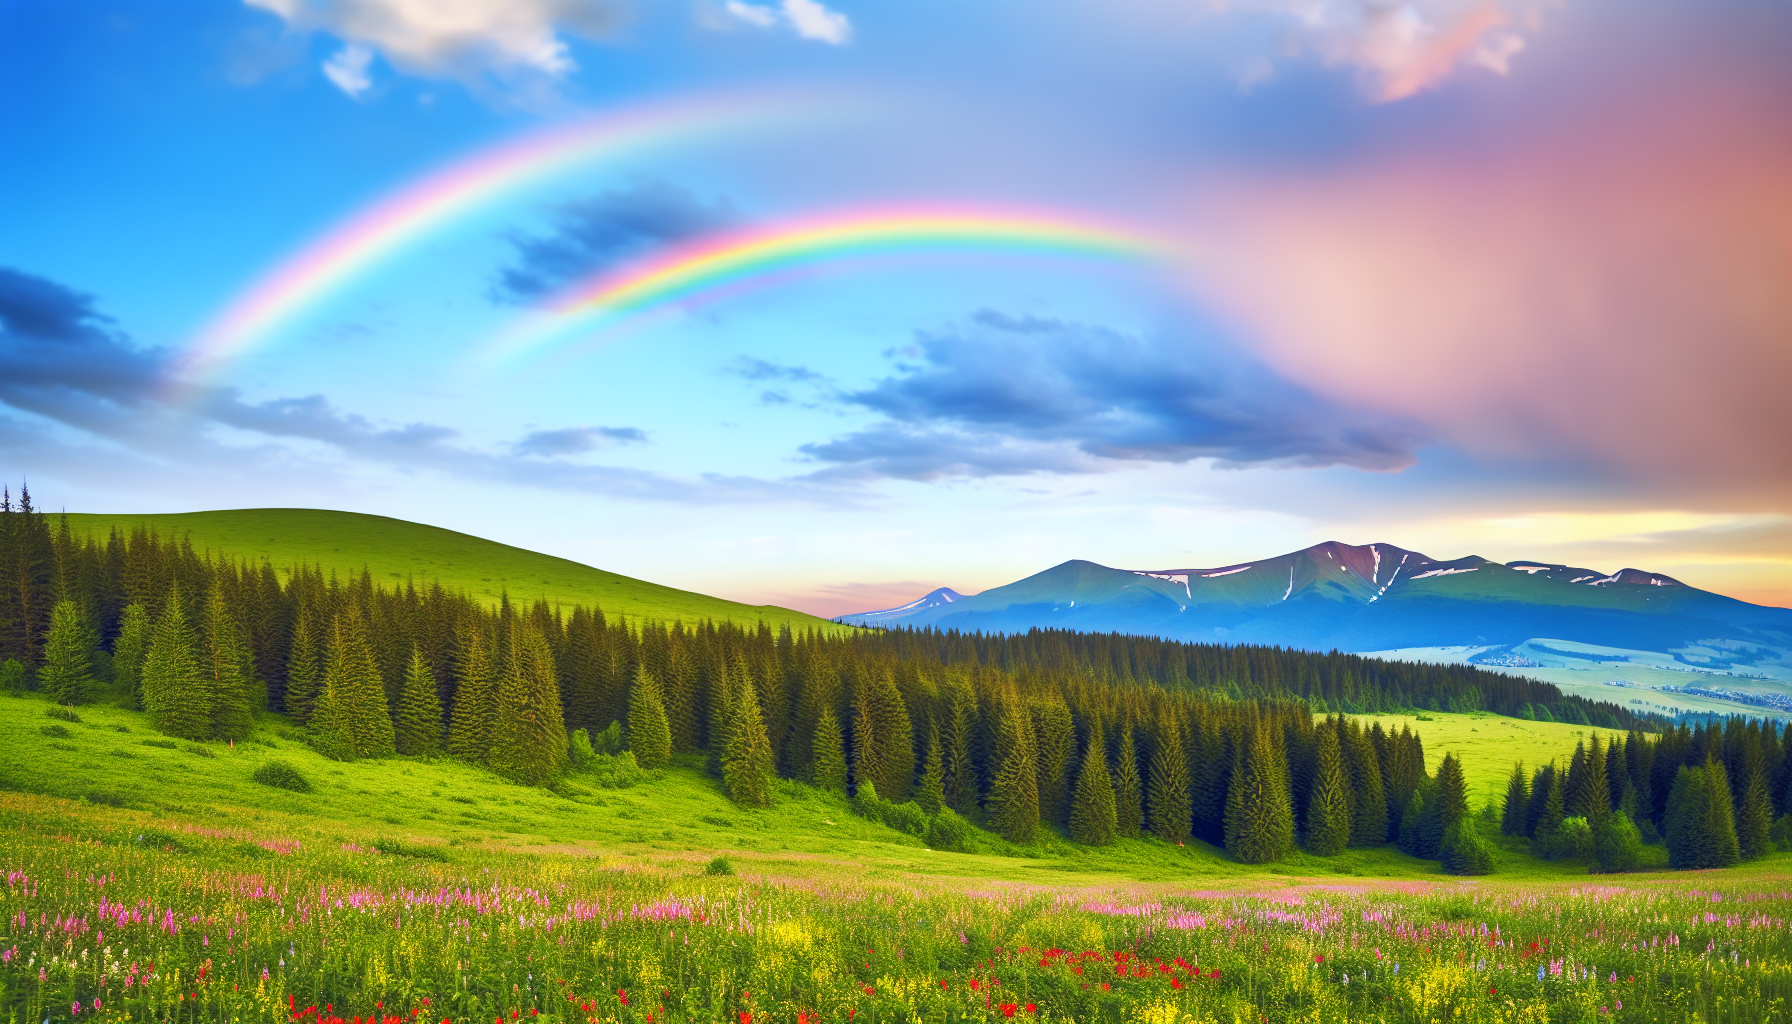 A serene landscape with a rainbow in the sky, symbolizing hope and blessings for a miracle baby